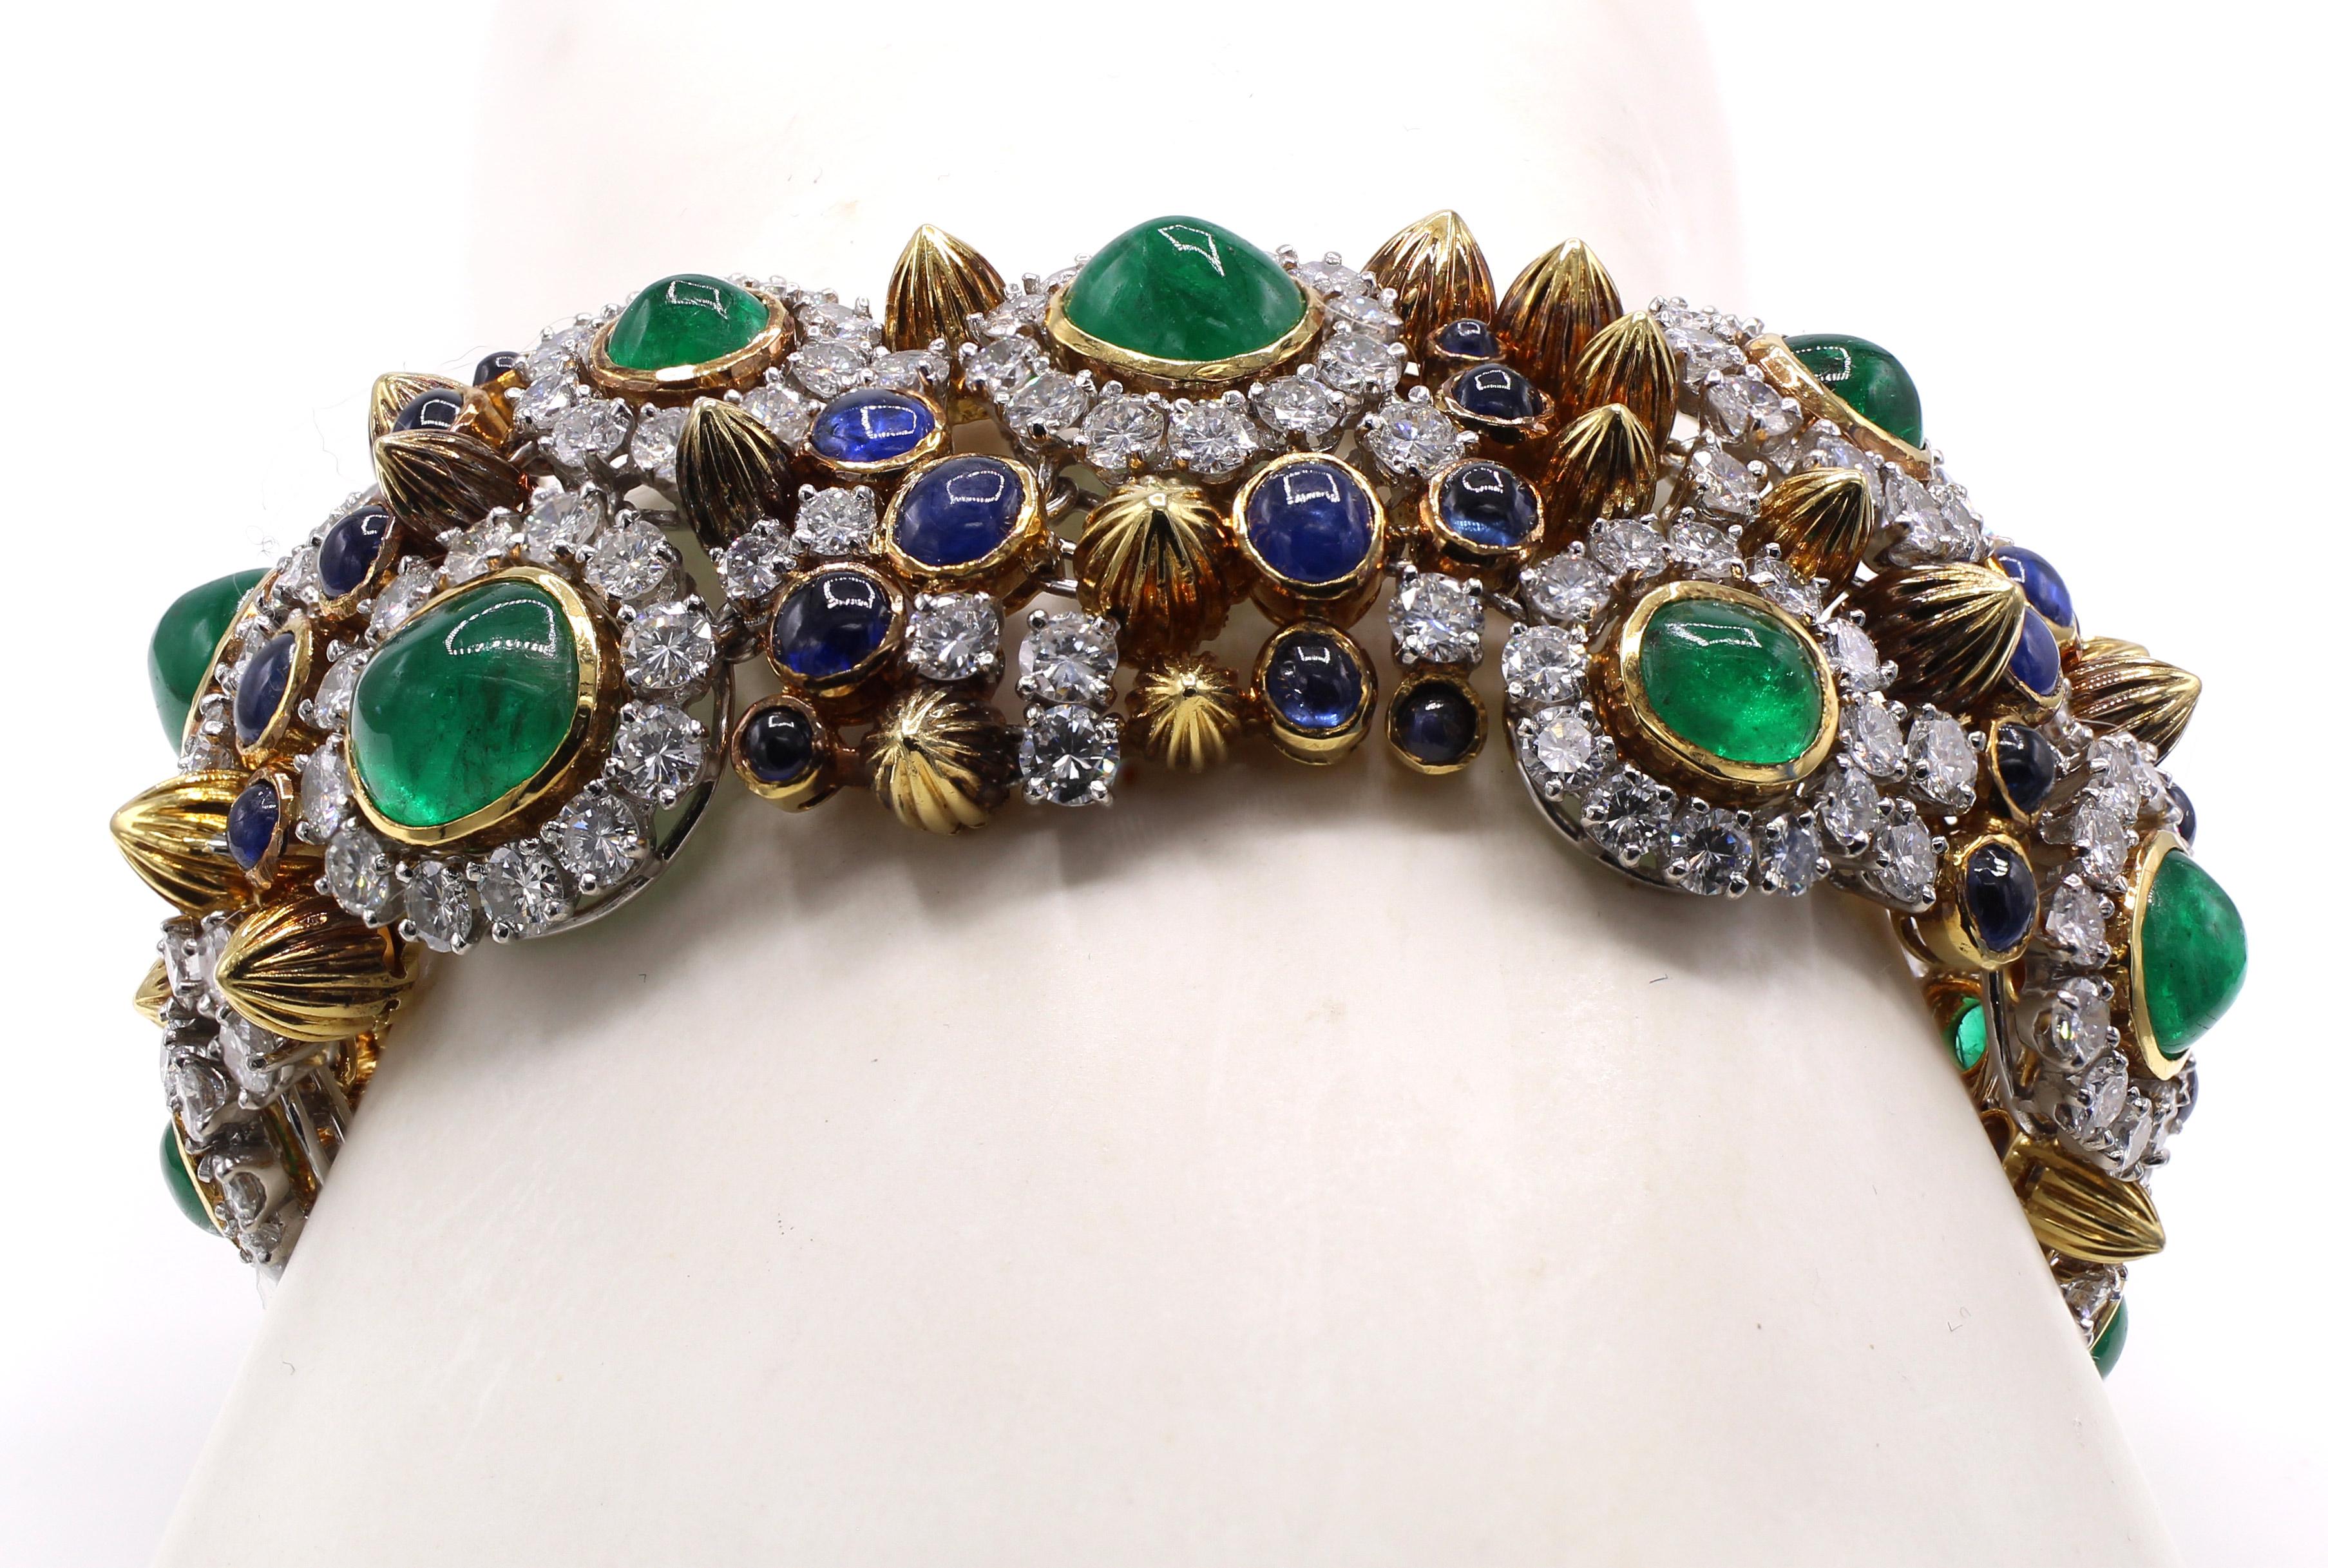 This amazing, unique and bold 1960s bracelet displays a colorful display of bright white and sparkly round brilliant cut diamonds, deep forest green cabochon emeralds and royal blue cabochon sapphires. Beautifully designed and masterfully